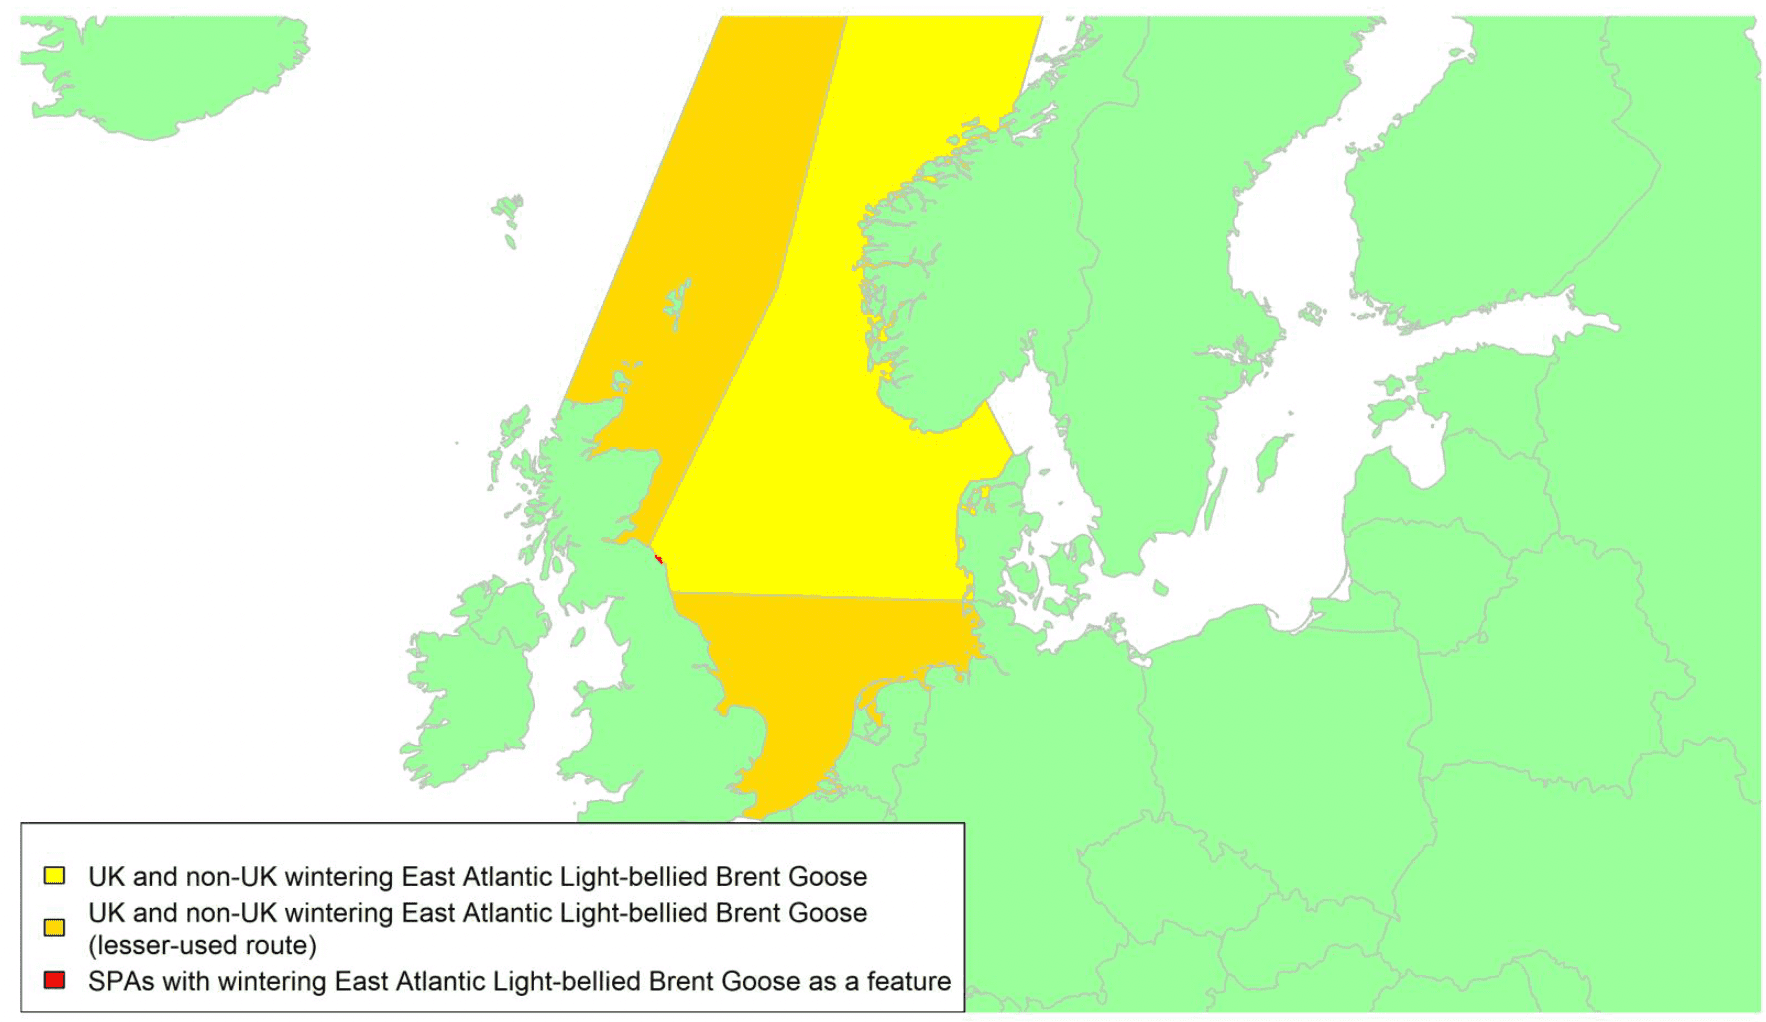 Map of North West Europe showing migratory routes and SPAs within the UK for Light-bellied Brent Geese as described in the text below.